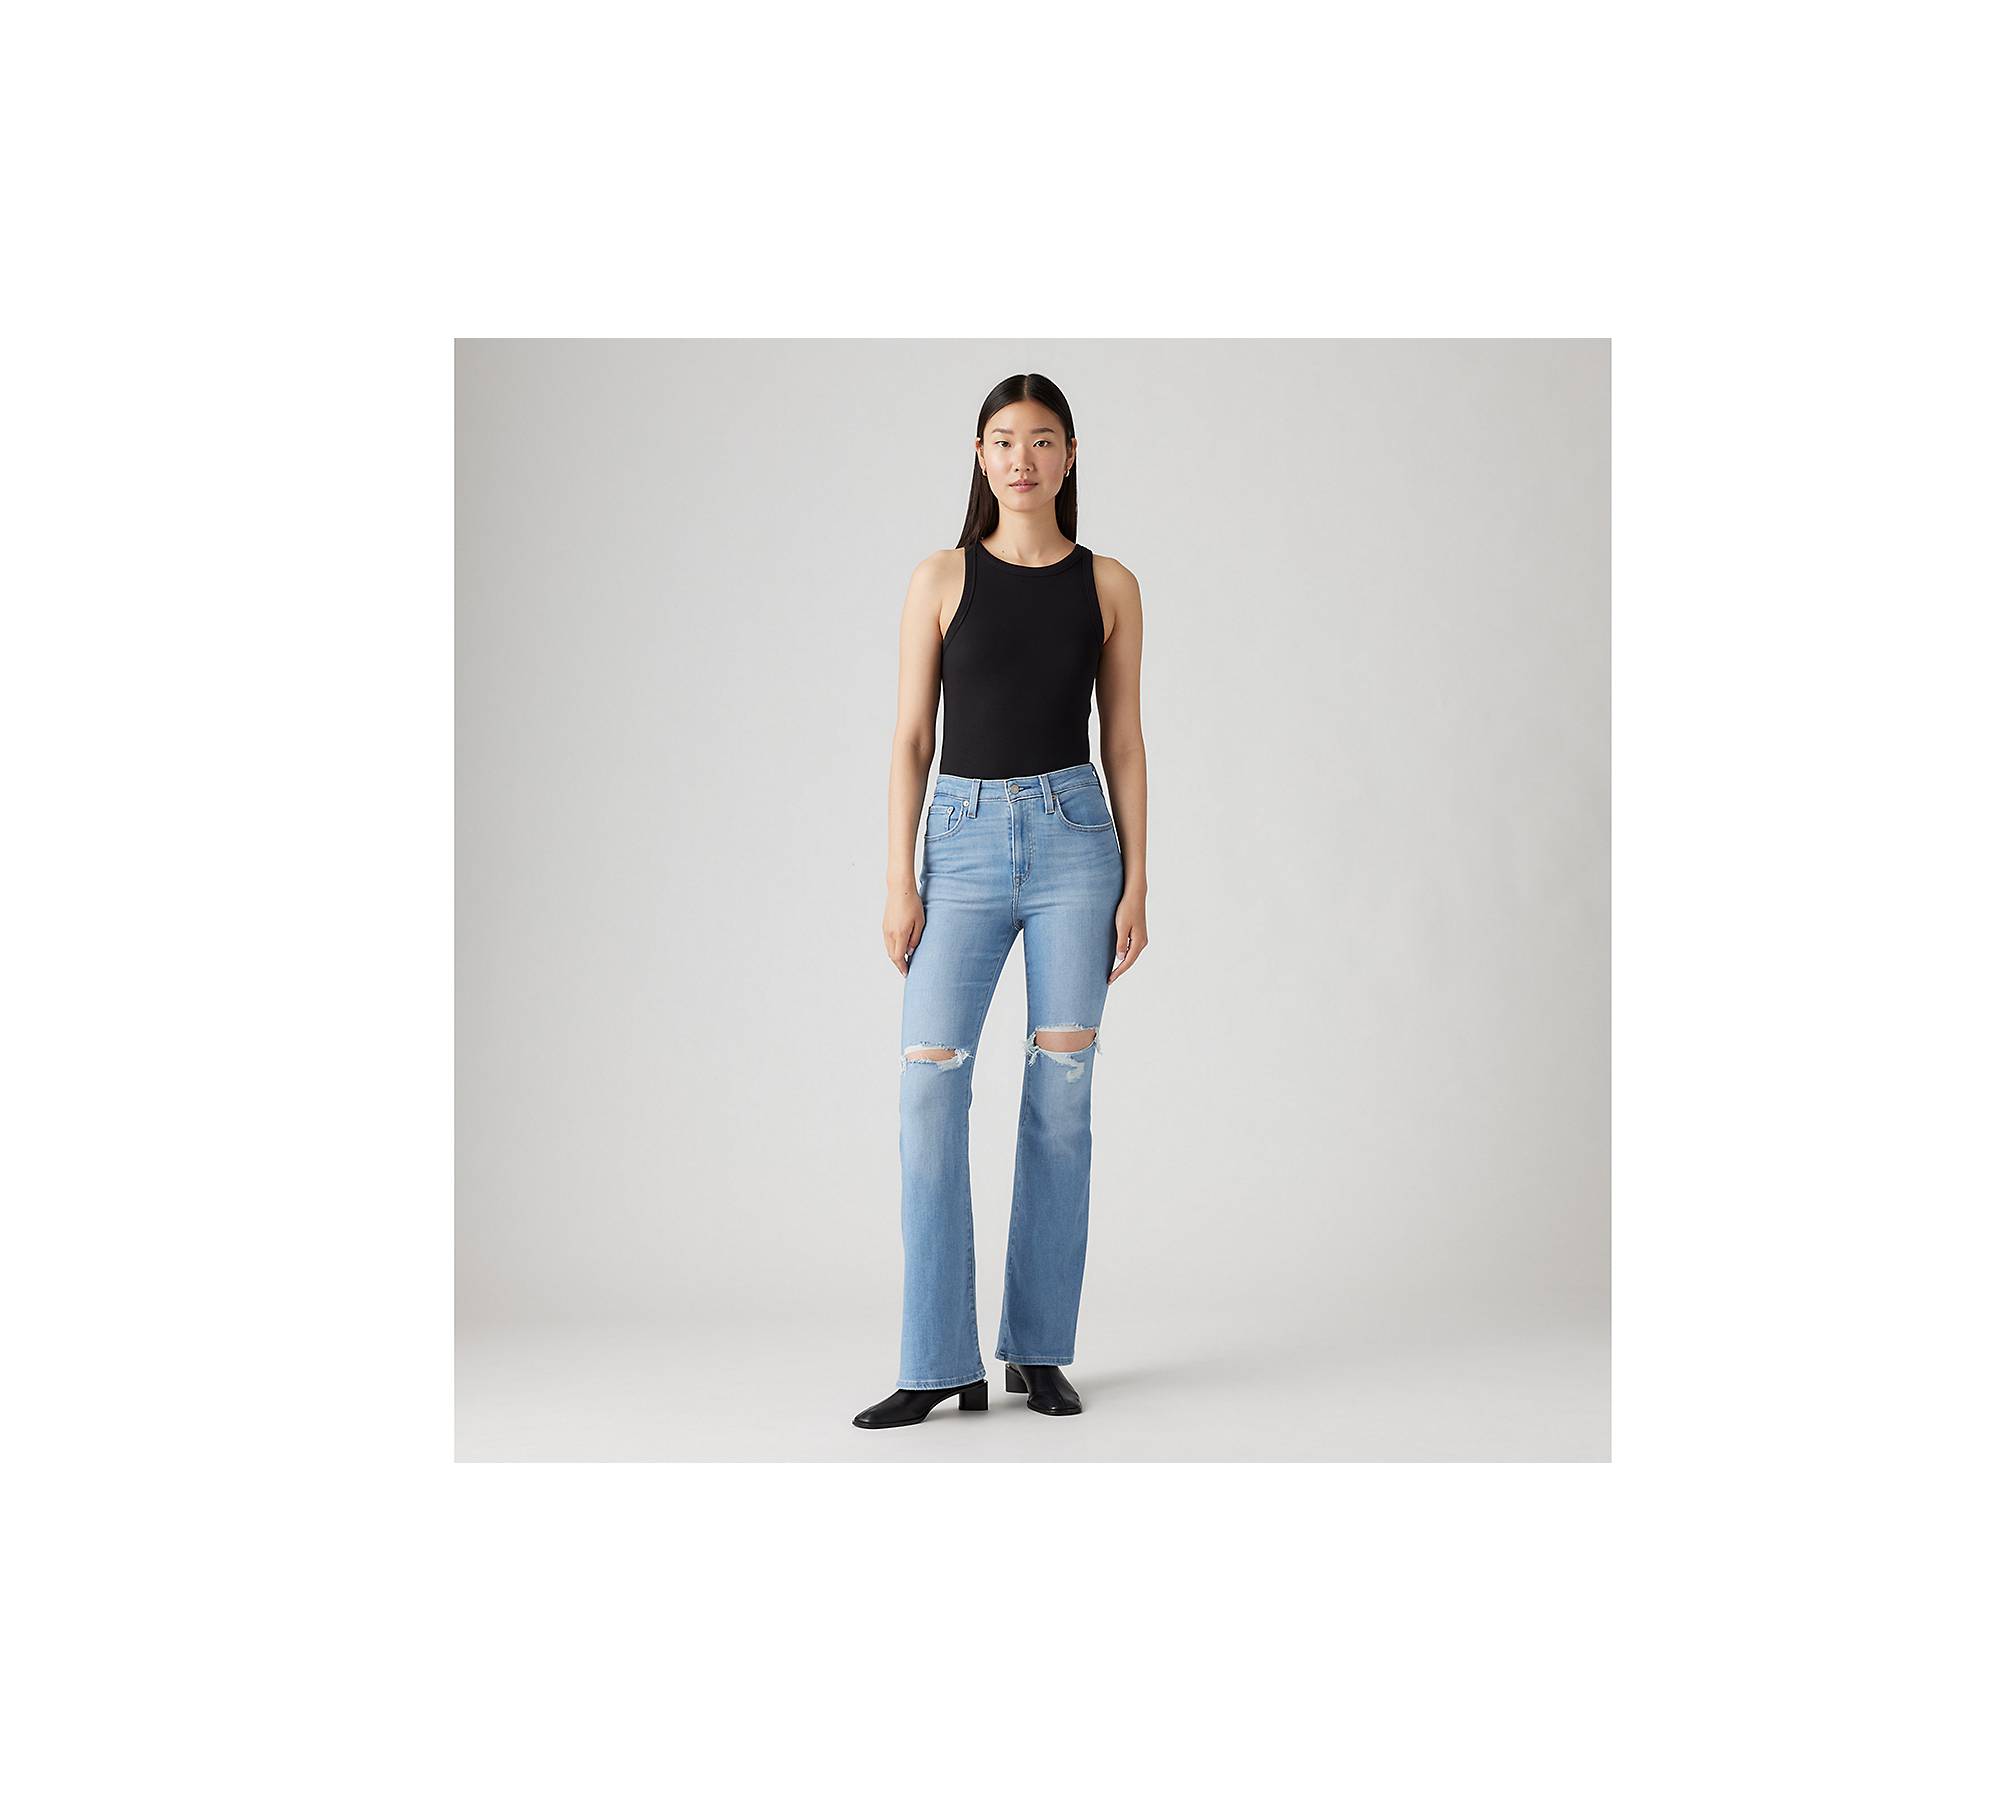  Jeans for Women- High-Rise Raw Hem Flare Jeans (Color : Medium  Wash, Size : X-Small) : Clothing, Shoes & Jewelry